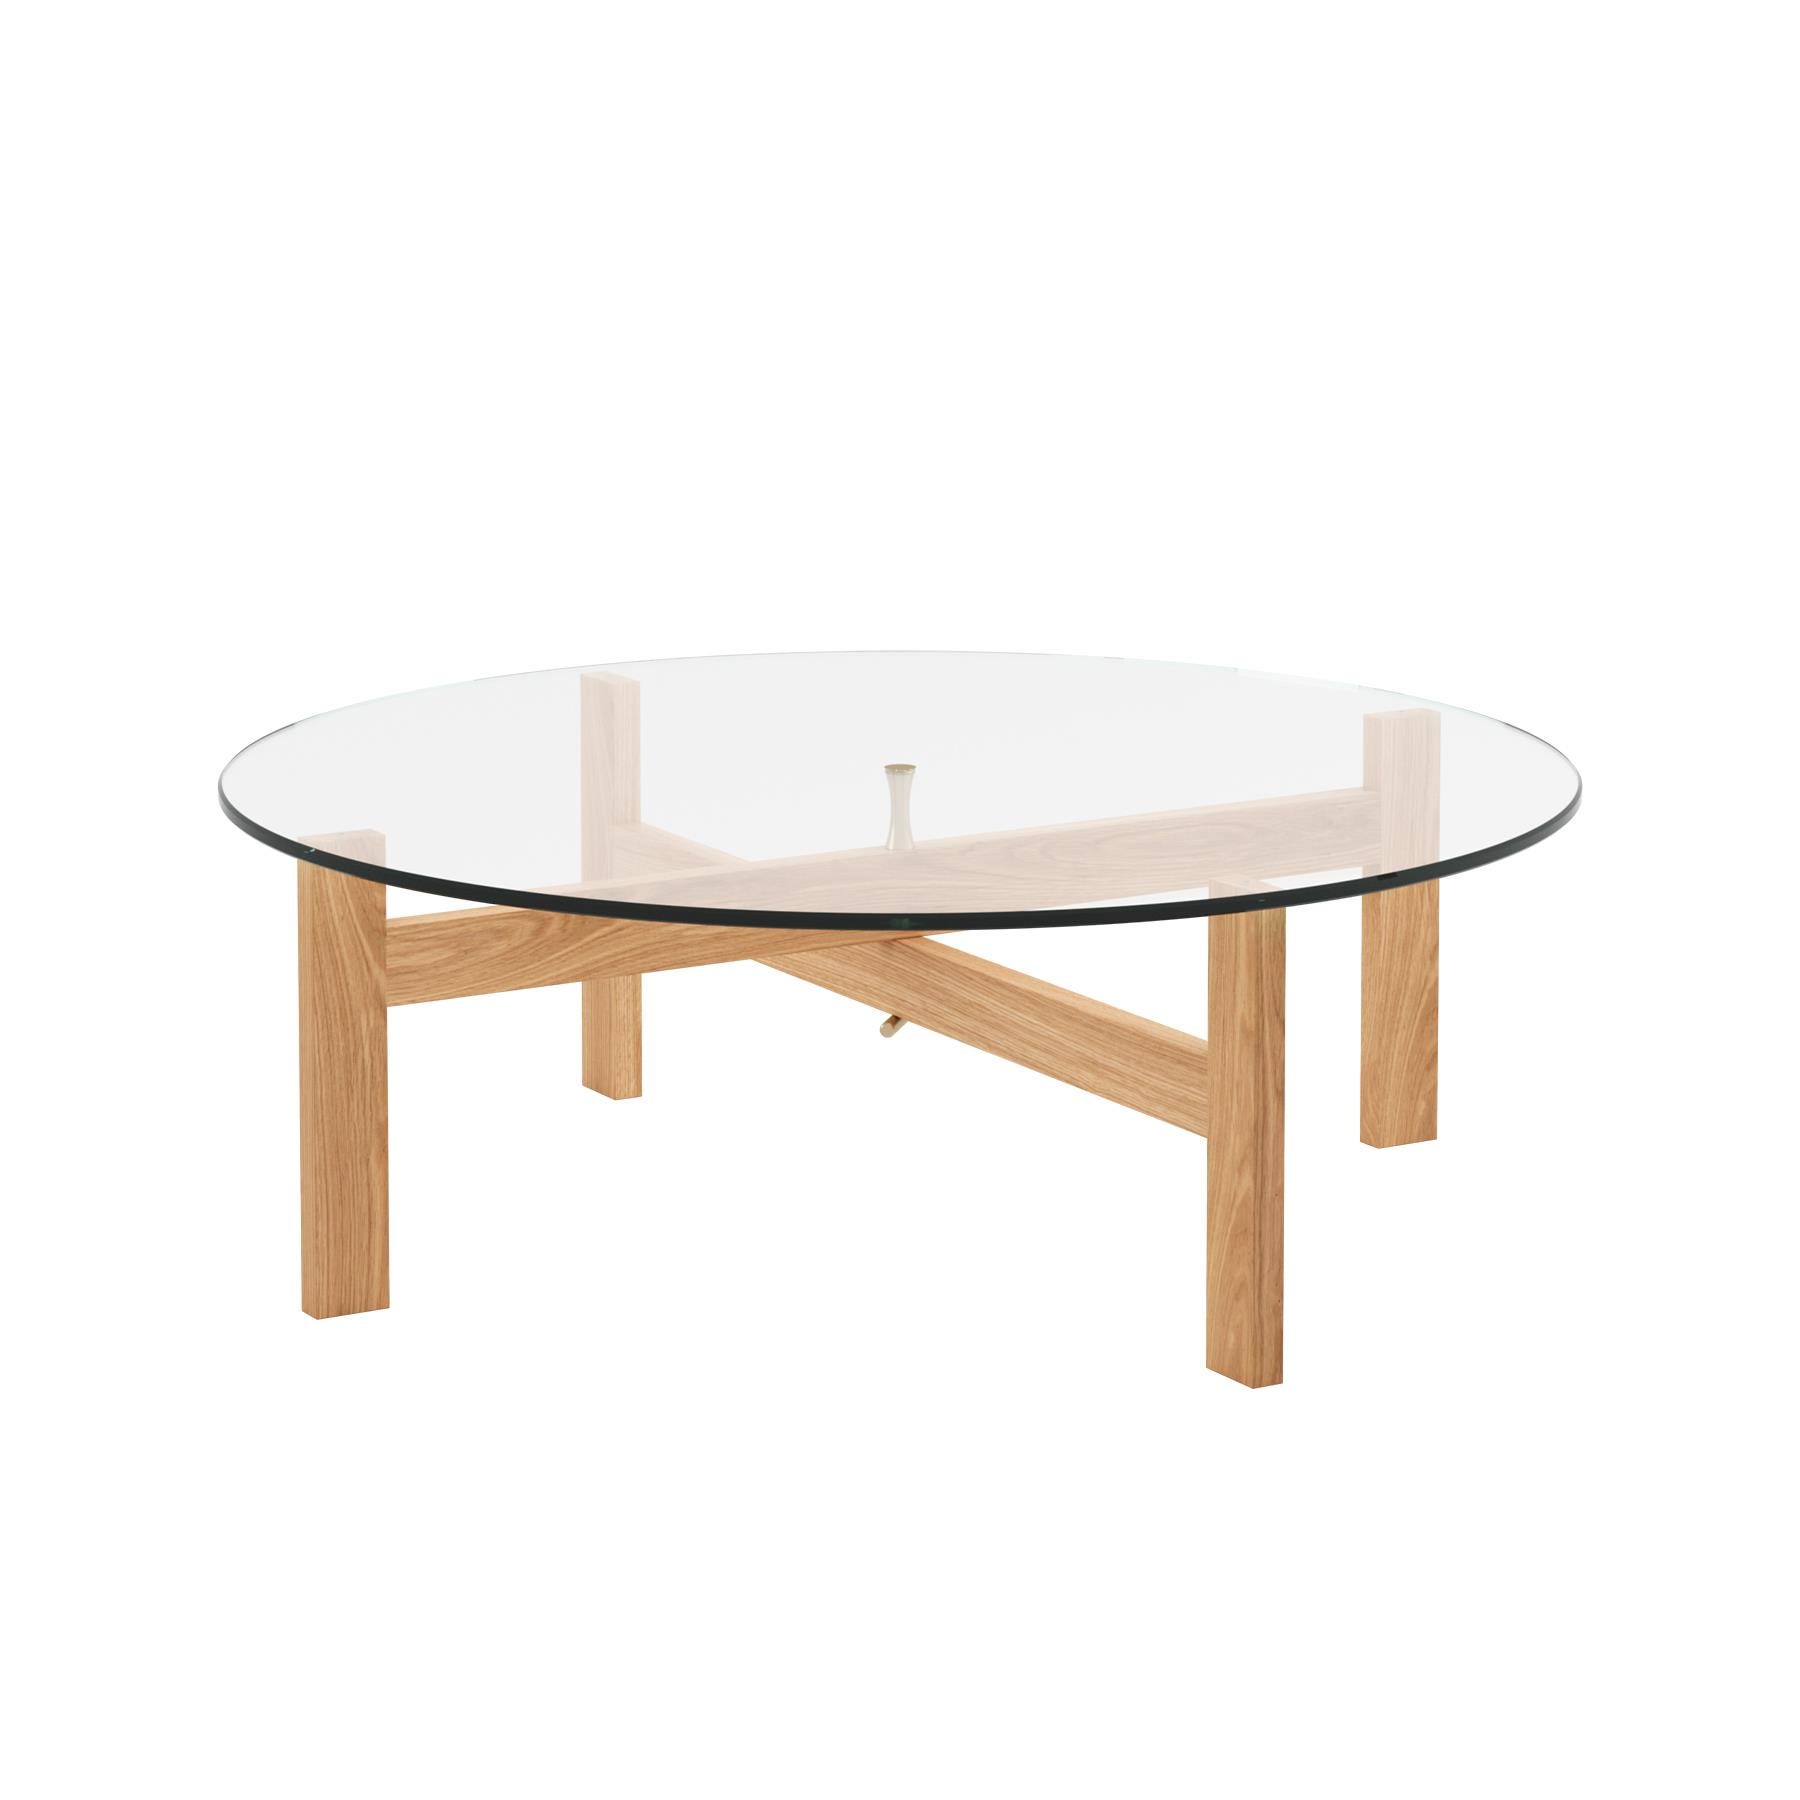 Moebe Round Coffee Table Light Wood Designer Furniture From Holloways Of Ludlow